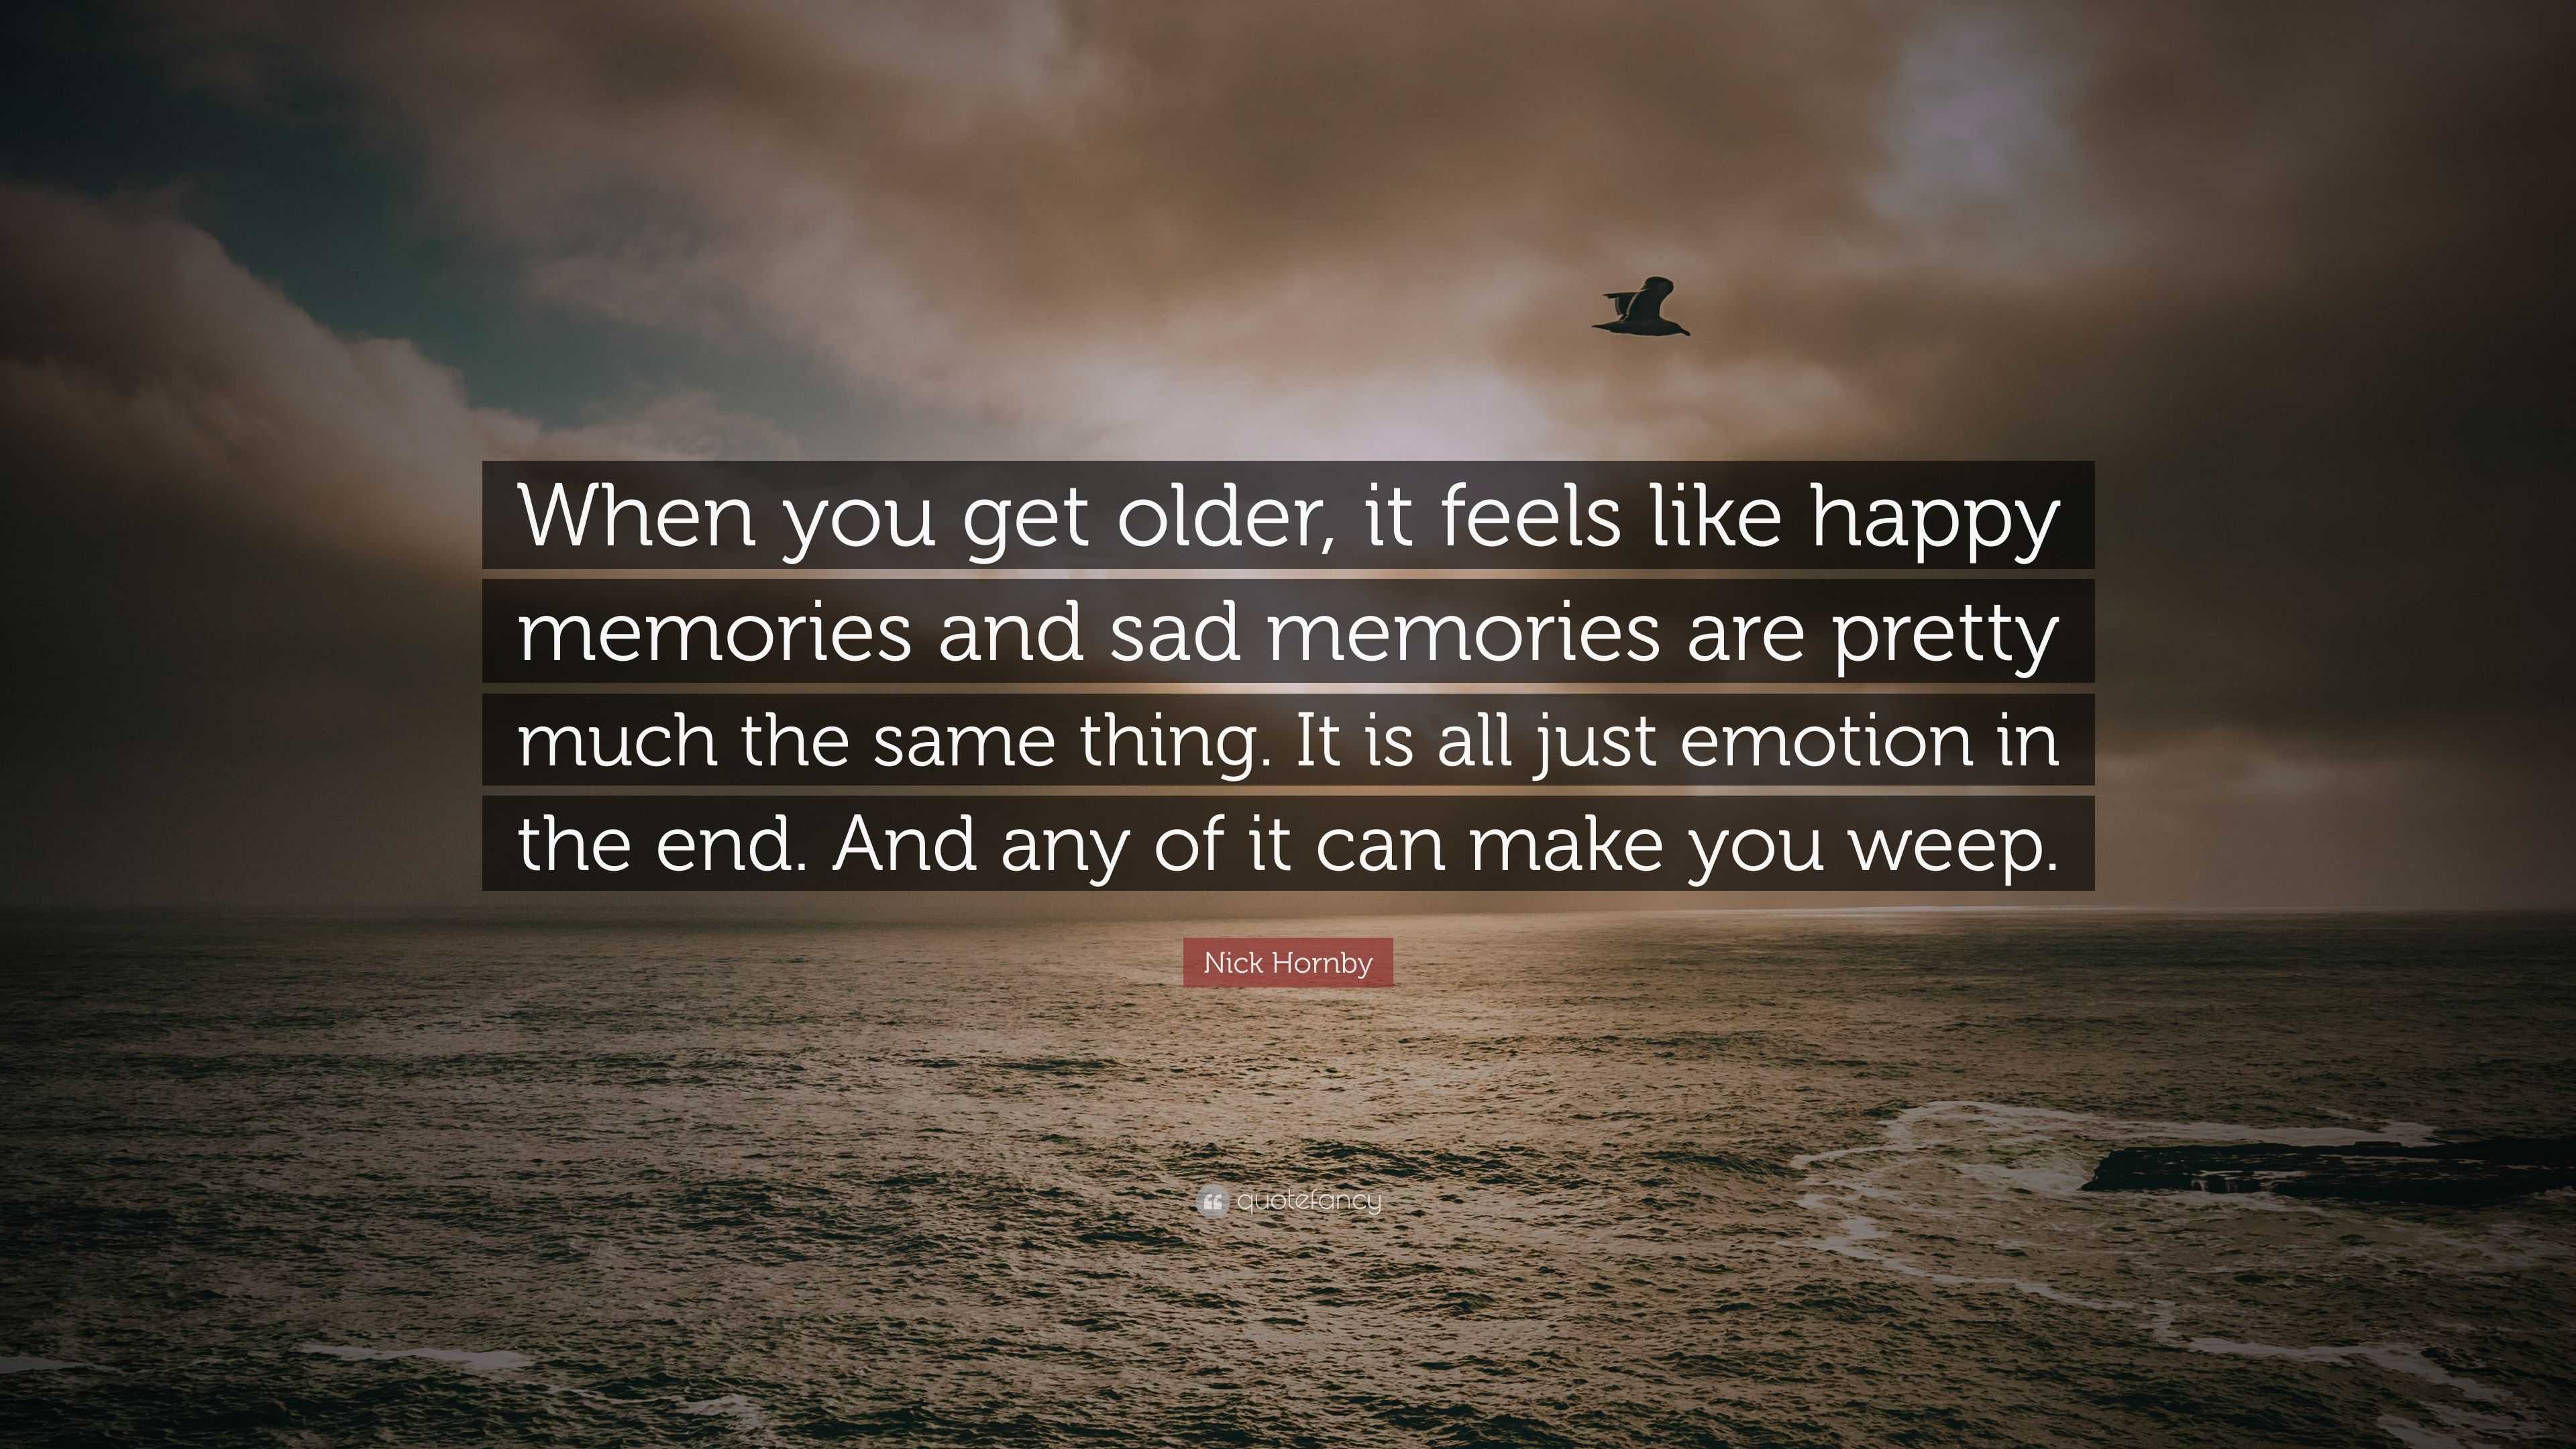 Nick Hornby Quote  When you get older it feels like 